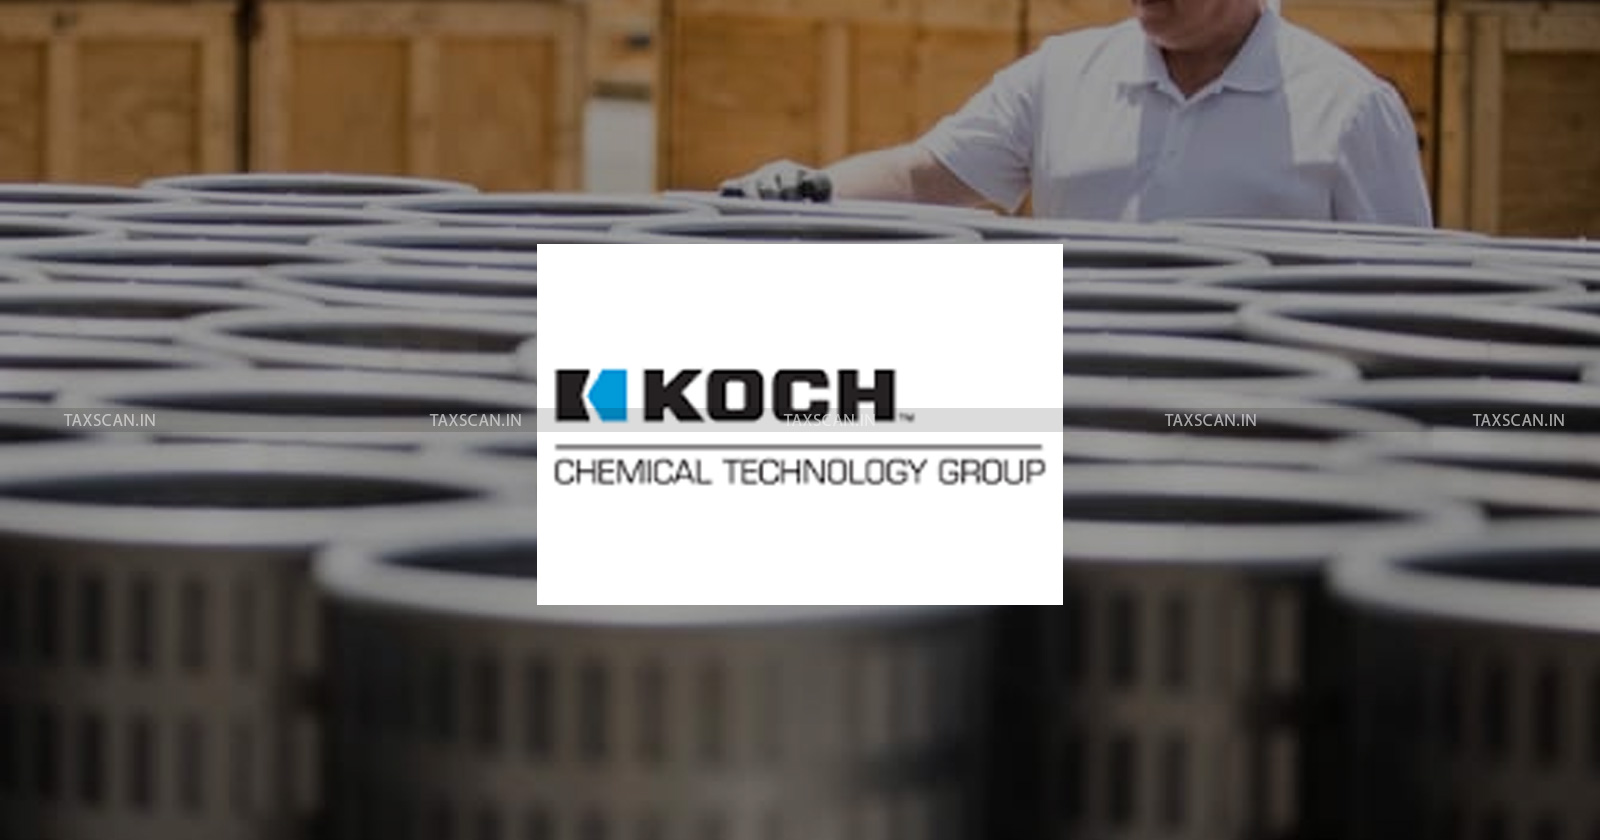 Relief to Koch Chemical Technology - CESTAT Quashes Excise Duty Demand - Extraction of Petroleum Fuels Goods - Absence of Speaking Order - CESTAT - CESTAT News - Excise - Customs - Tax News - TAXSCAN